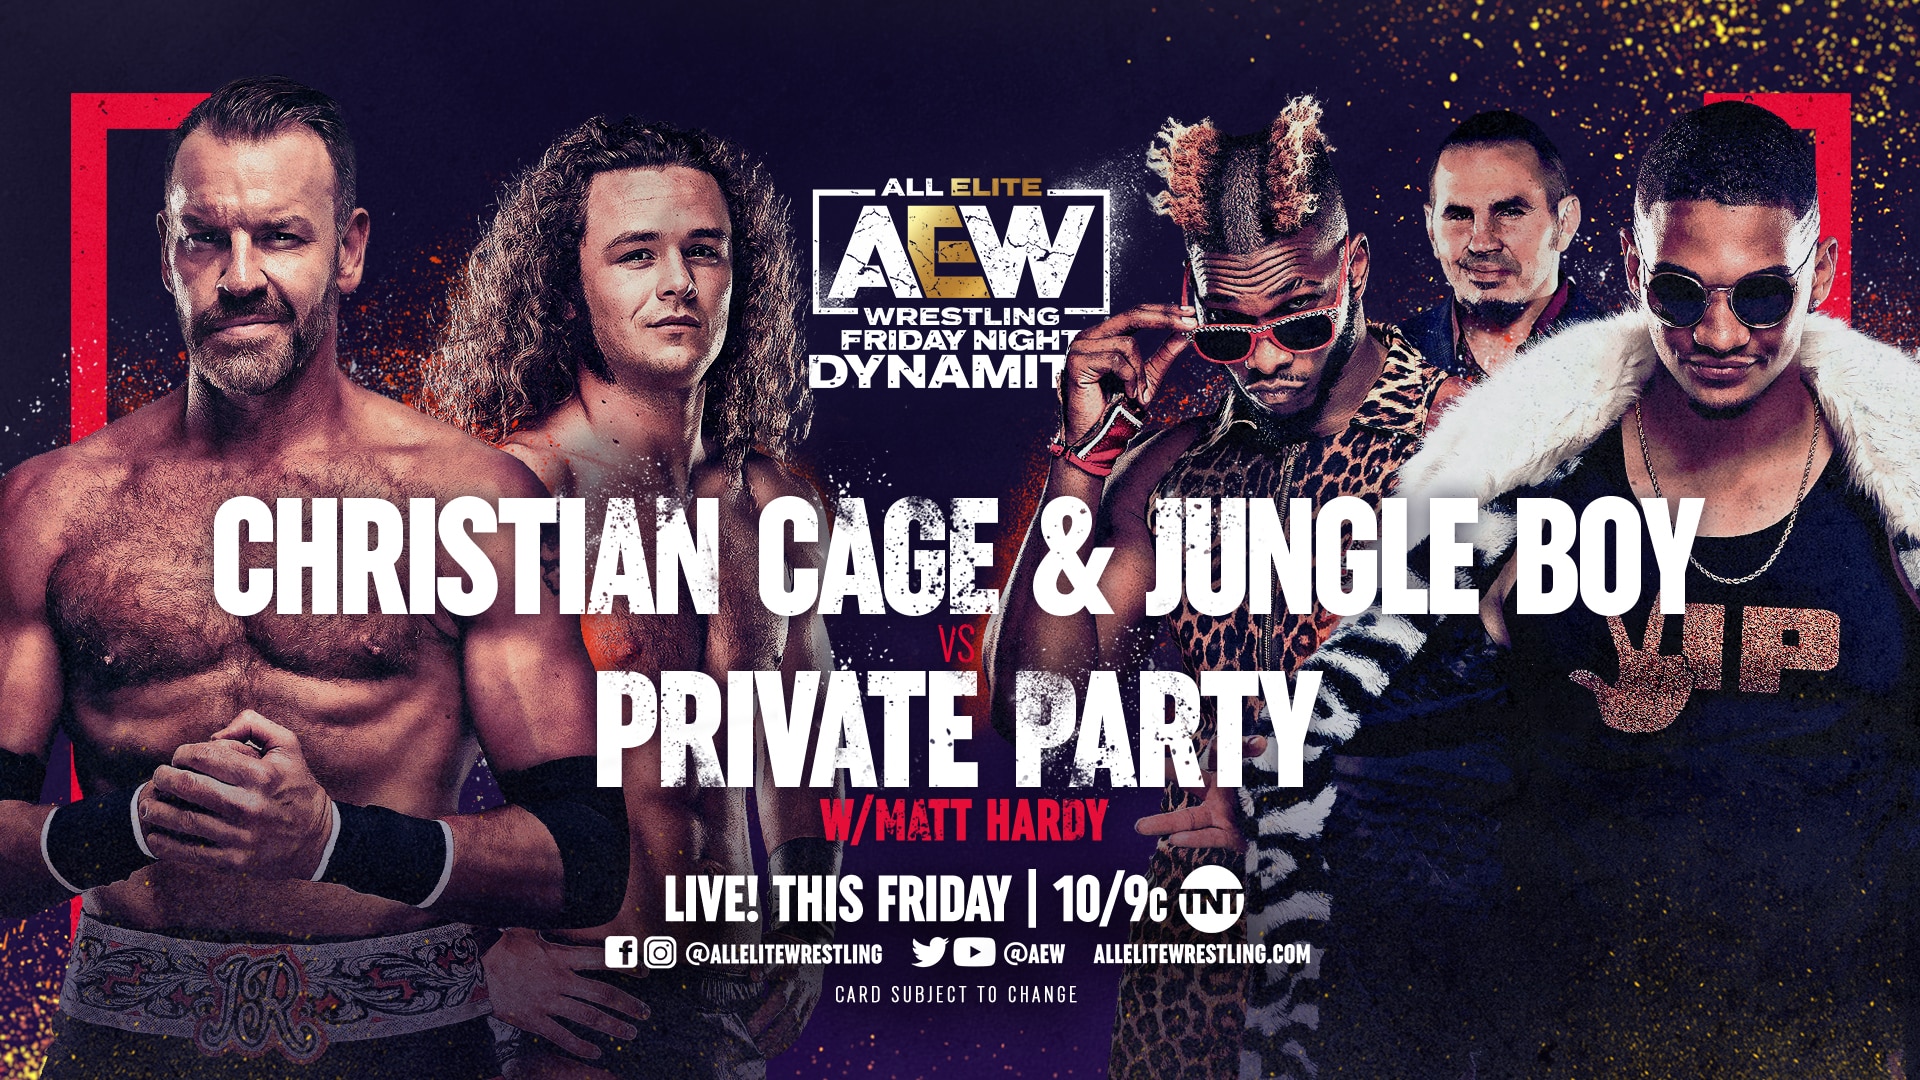 Christian Cage and Jungle Boy vs Private Party